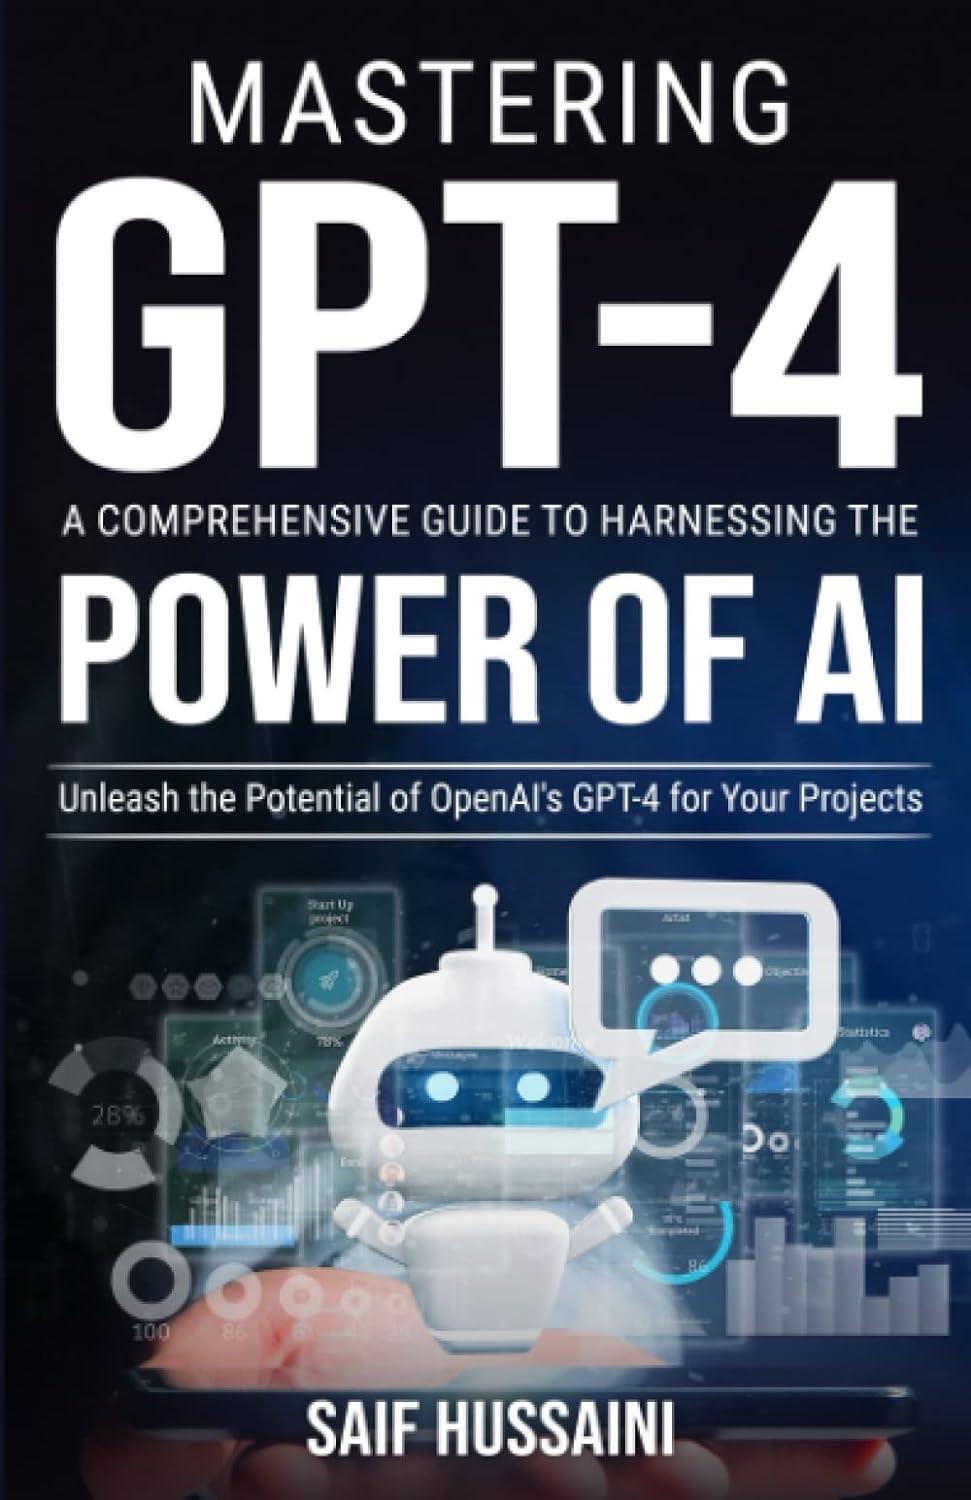 mastering gpt-4 a comprehensive guide to harnessing the power of ai unleash the potential of openai's gpt-4